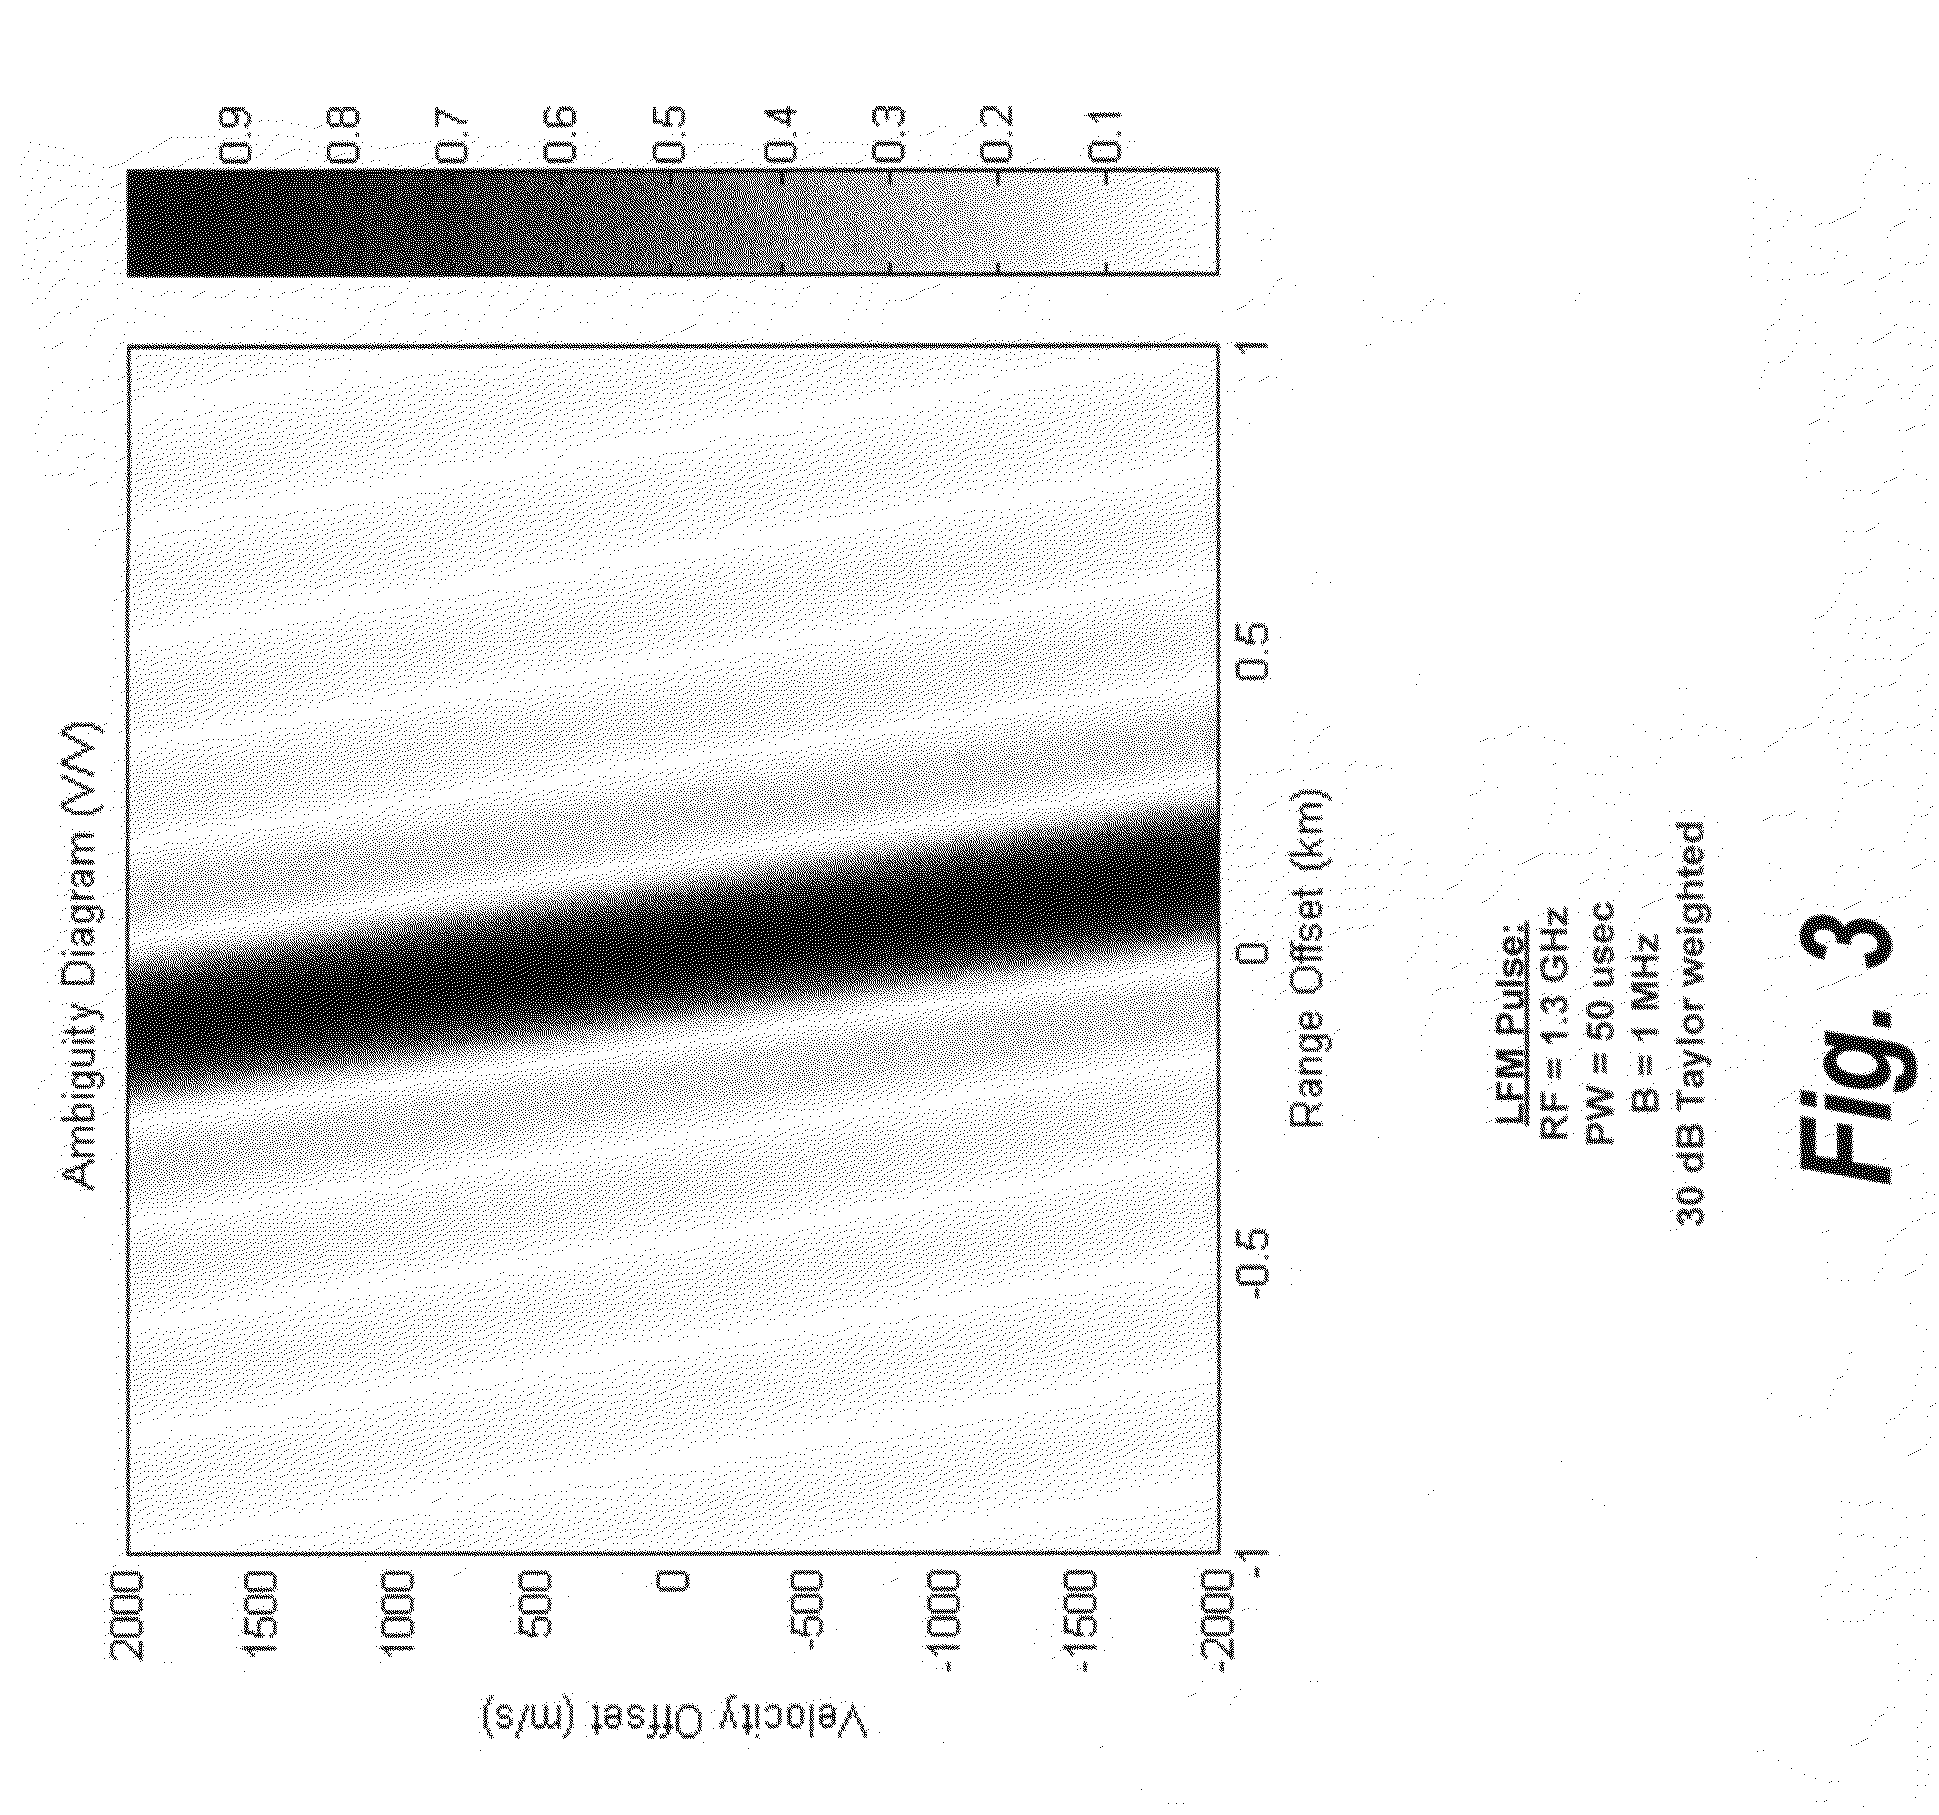 Apparatus and methods for detection of multiple targets within radar resolution cell